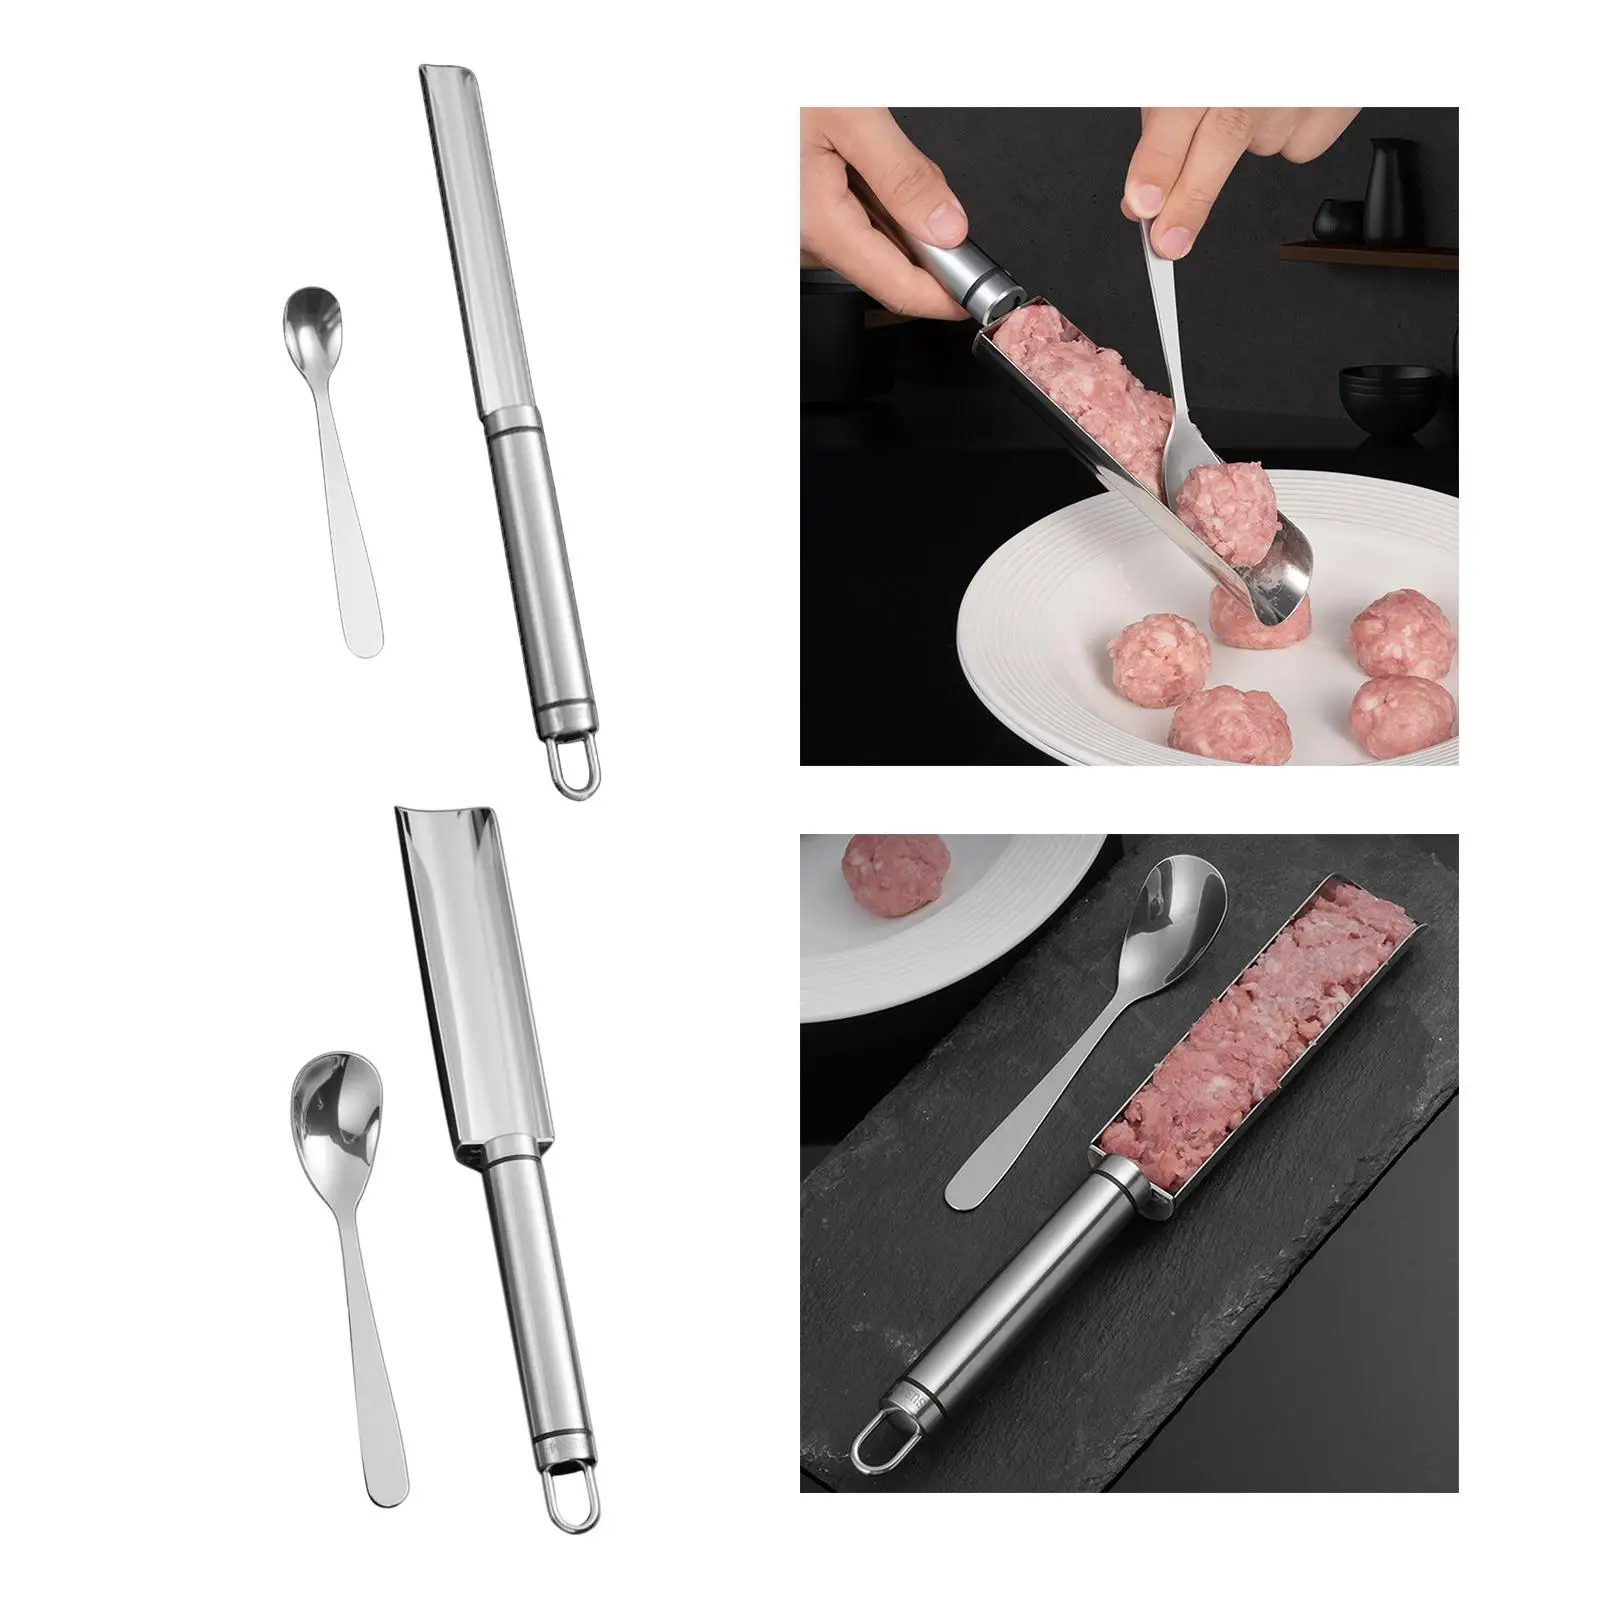 Meatball Maker Scoop Kitchen Tool Household Reusable Gadgets Utensils Stainless Steel for Cooking Prawn Balls Hotels Burger